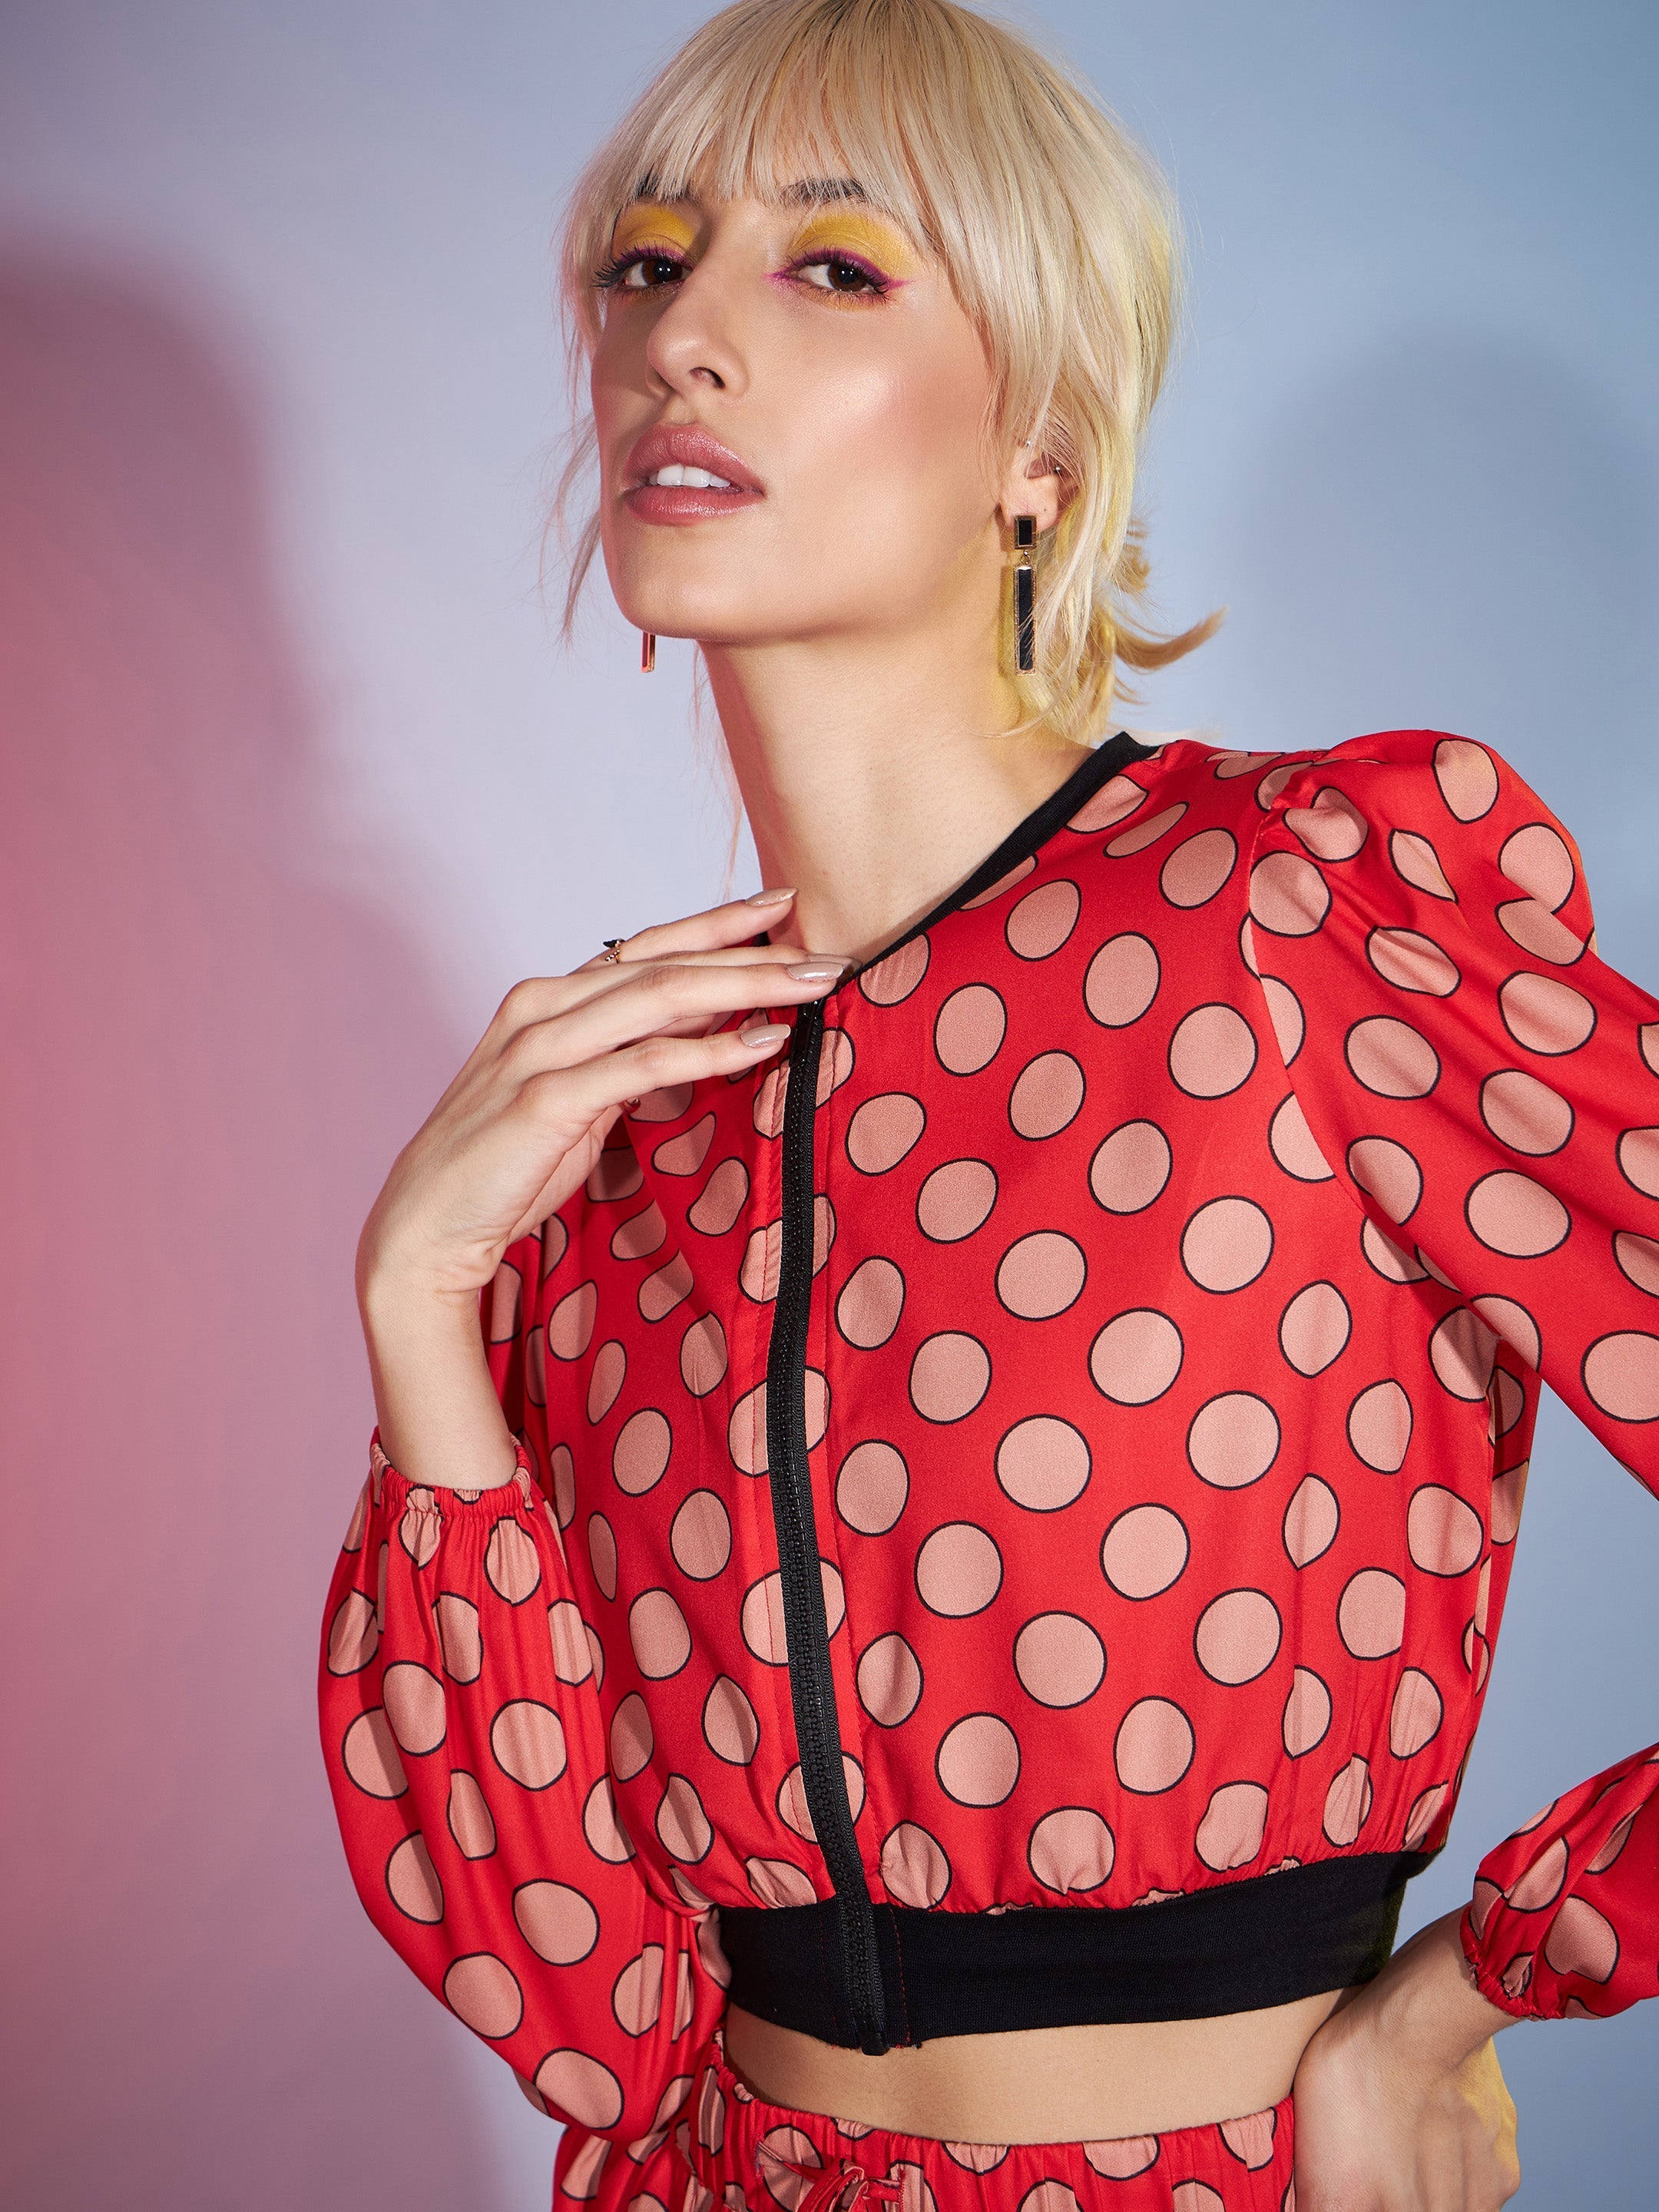 Women's Red Polka Jacket With Darted Pants - SASSAFRAS